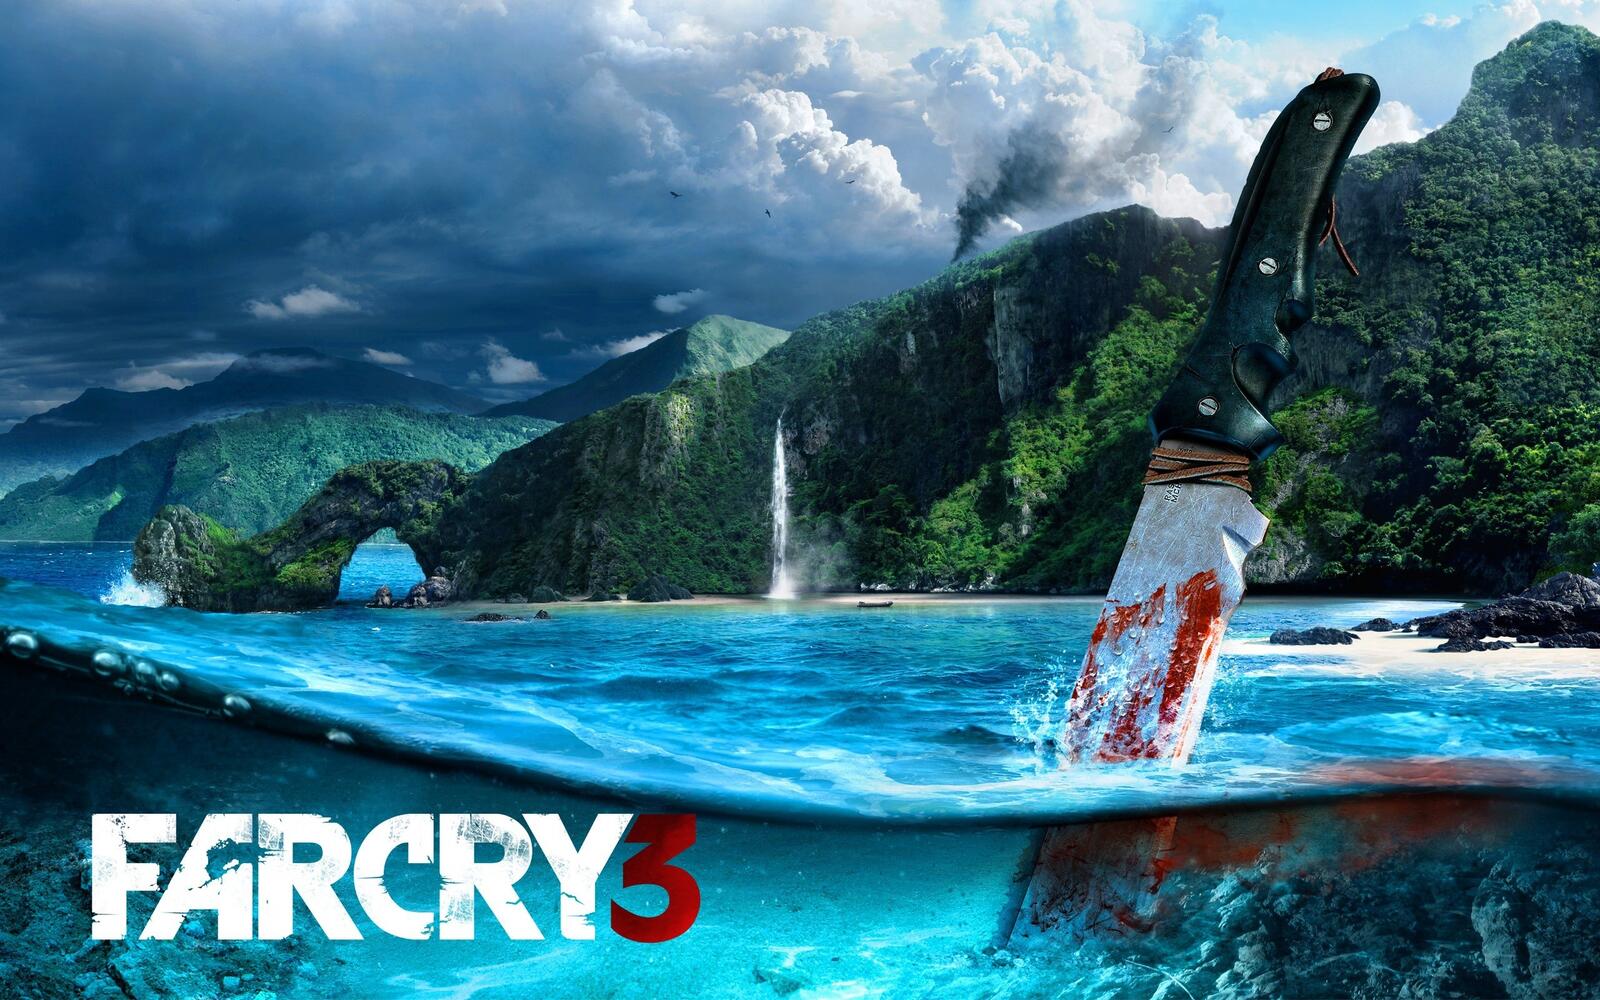 Free photo Cool desktop screensaver from Far Cry 3 game